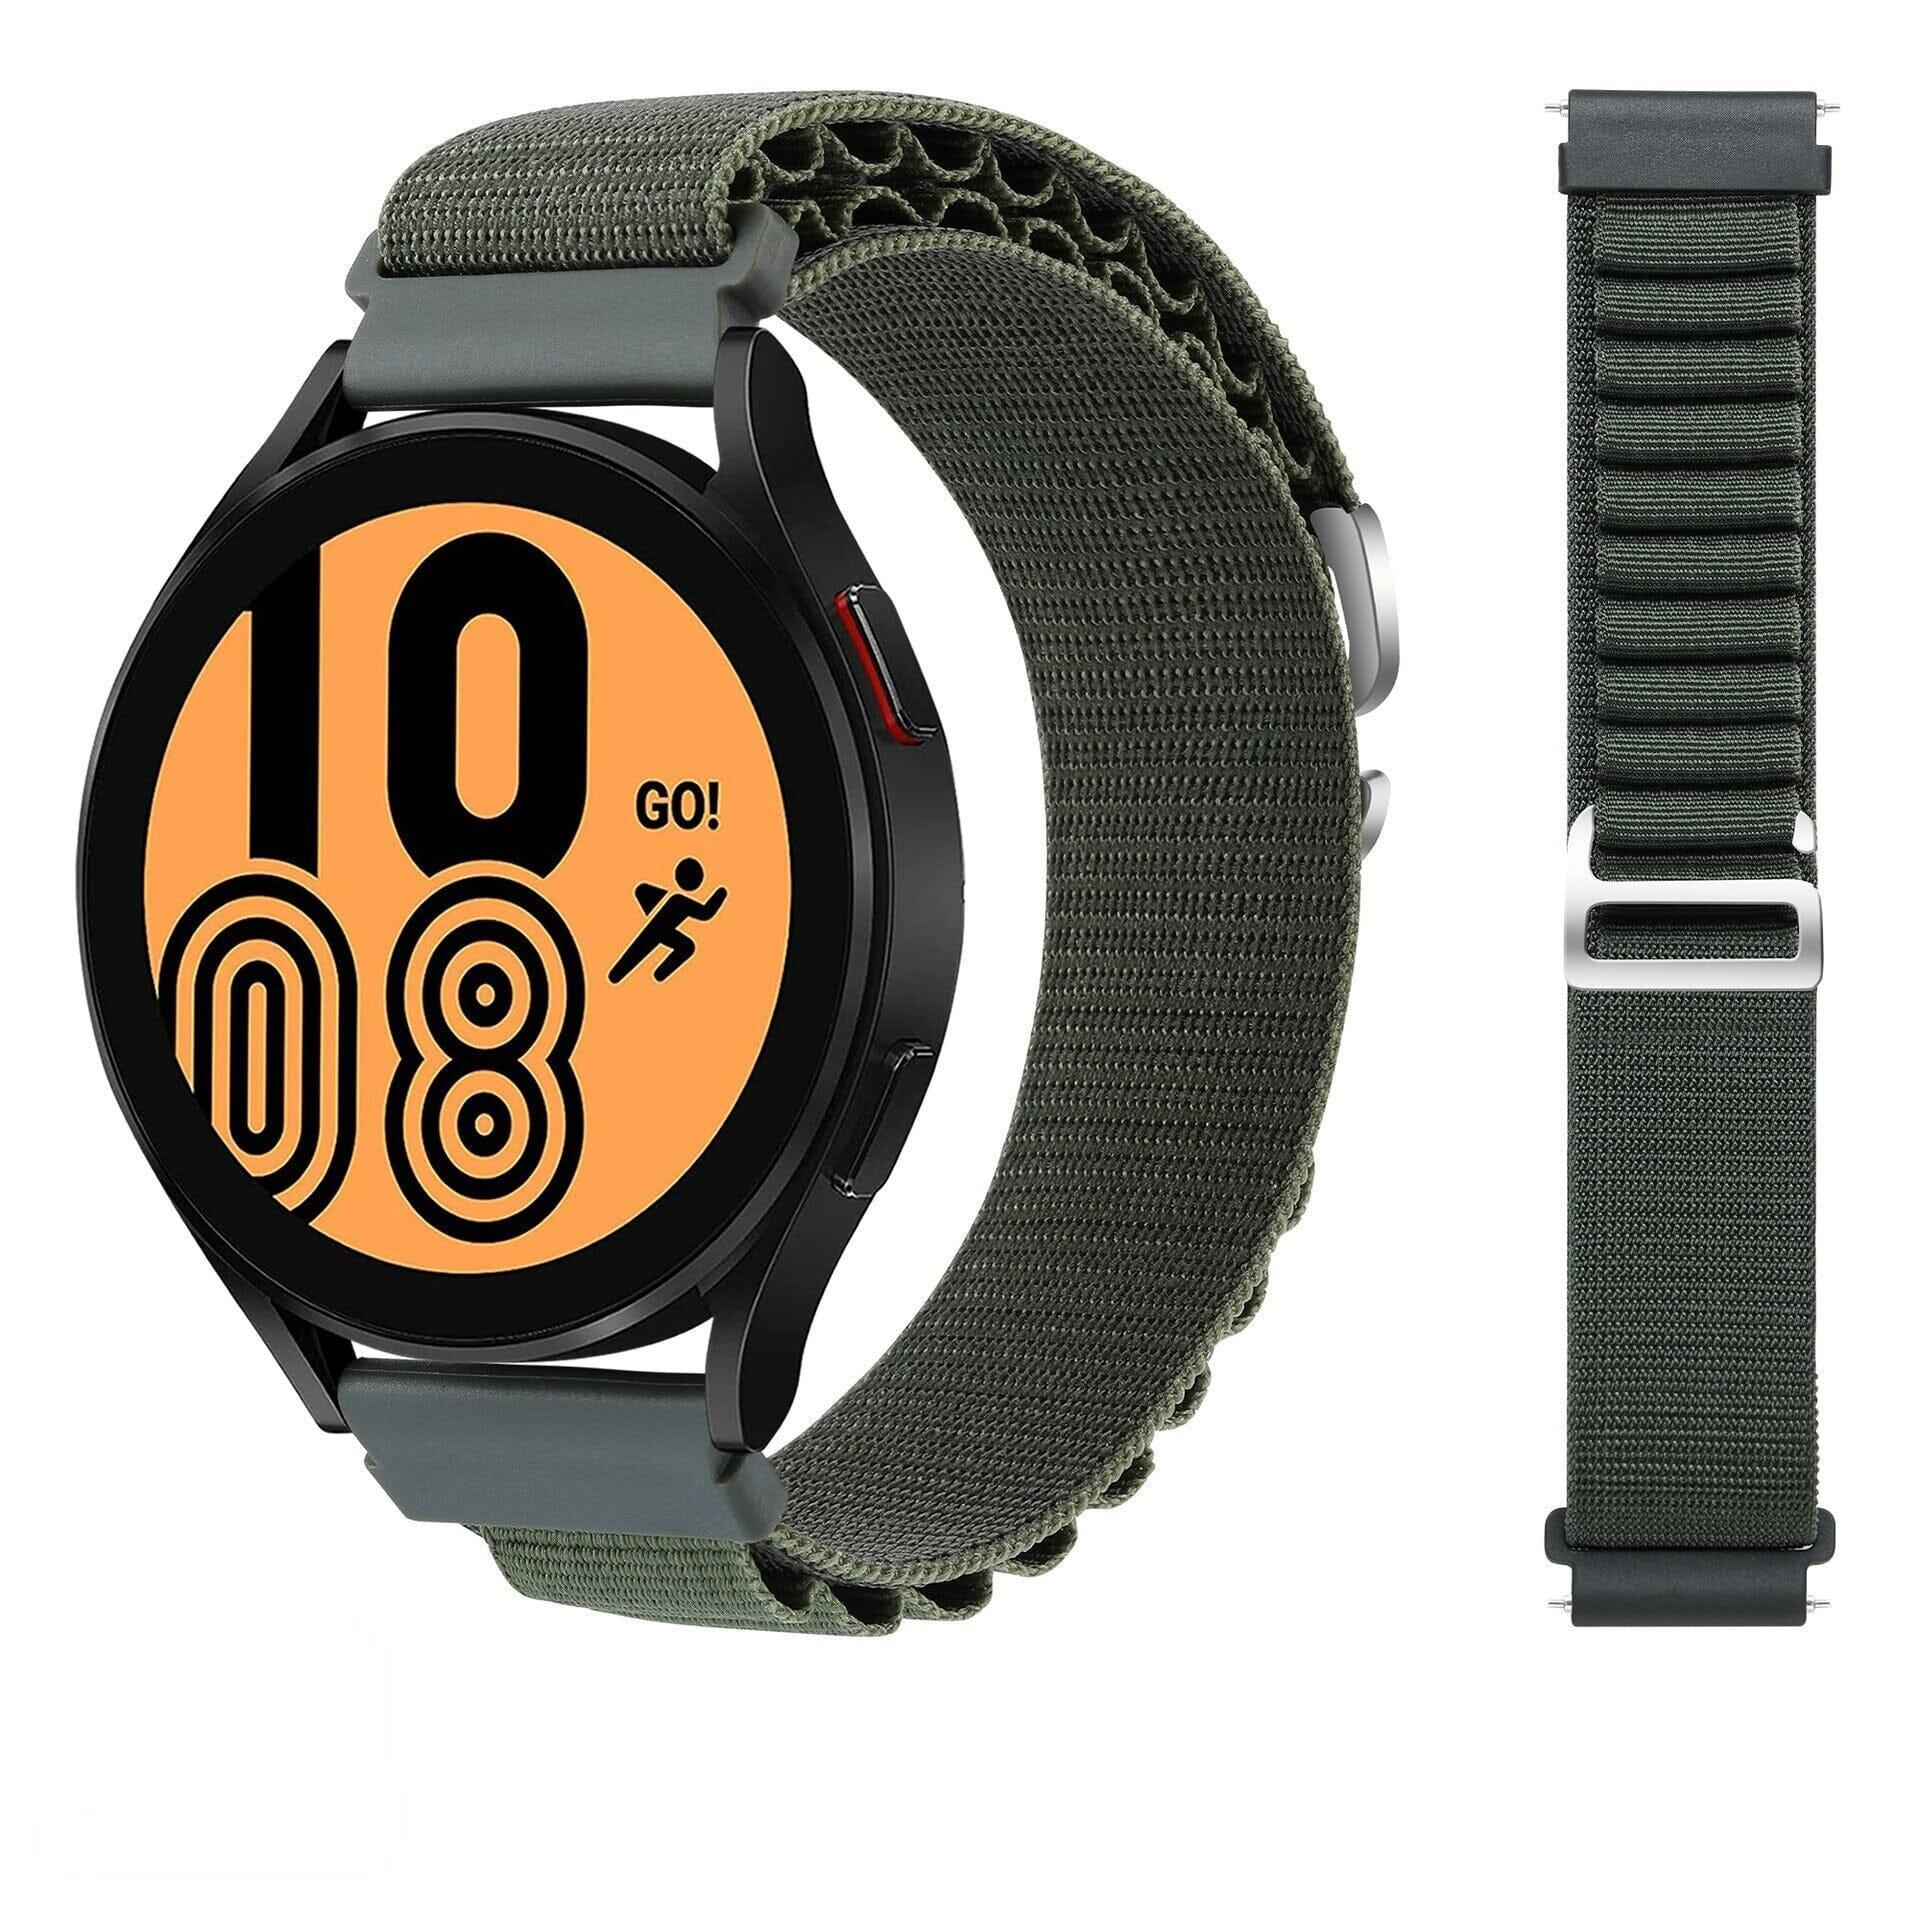 Alpine Loop Watch Straps Compatible with the Huawei Talkband B5